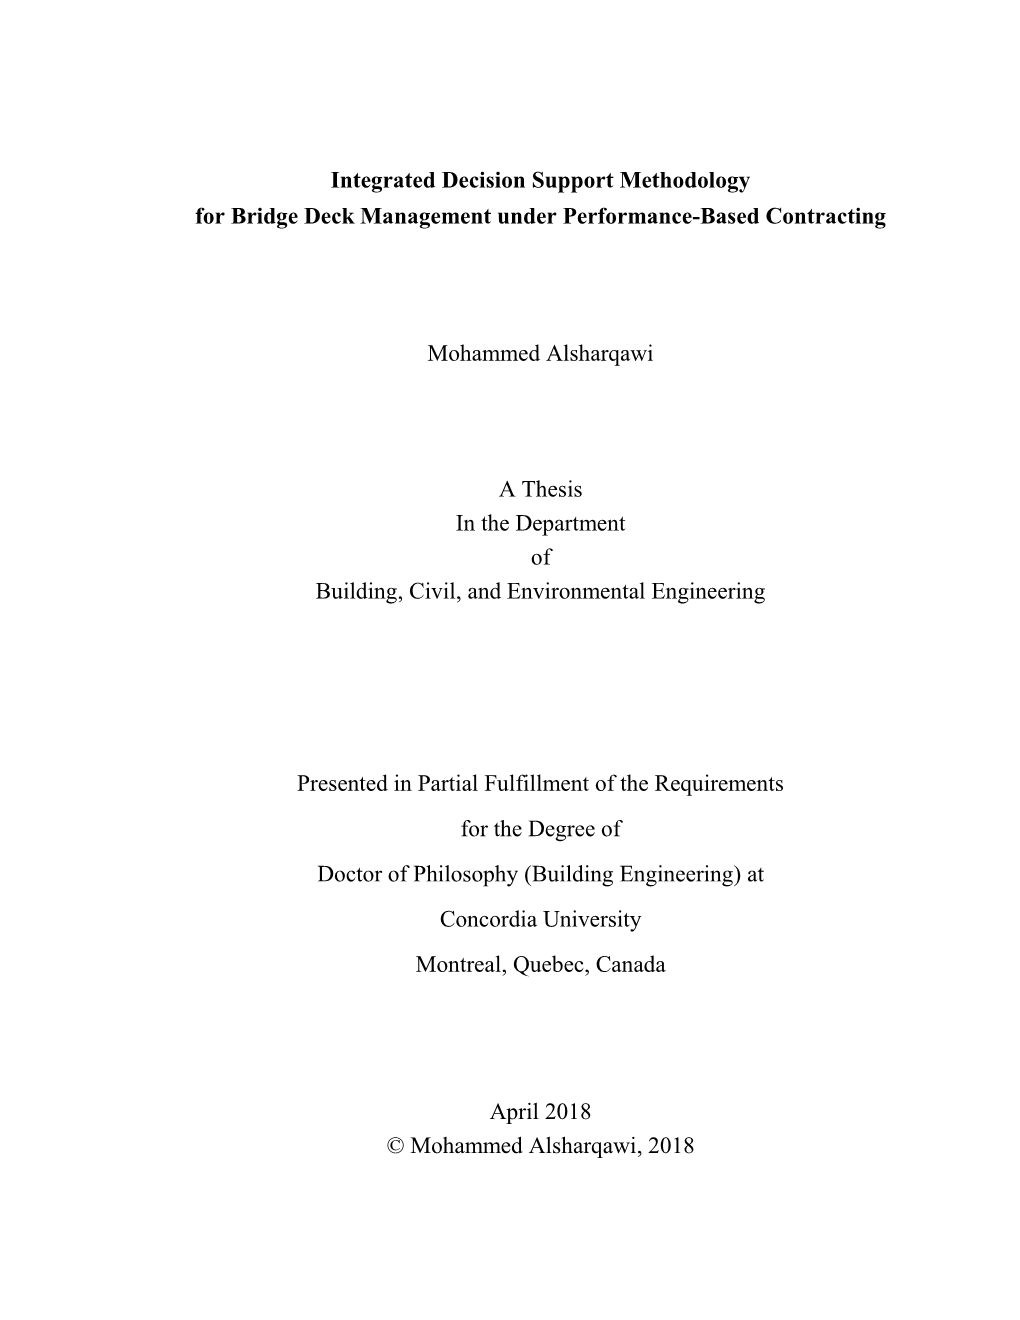 Integrated Decision Support Methodology for Bridge Deck Management Under Performance-Based Contracting